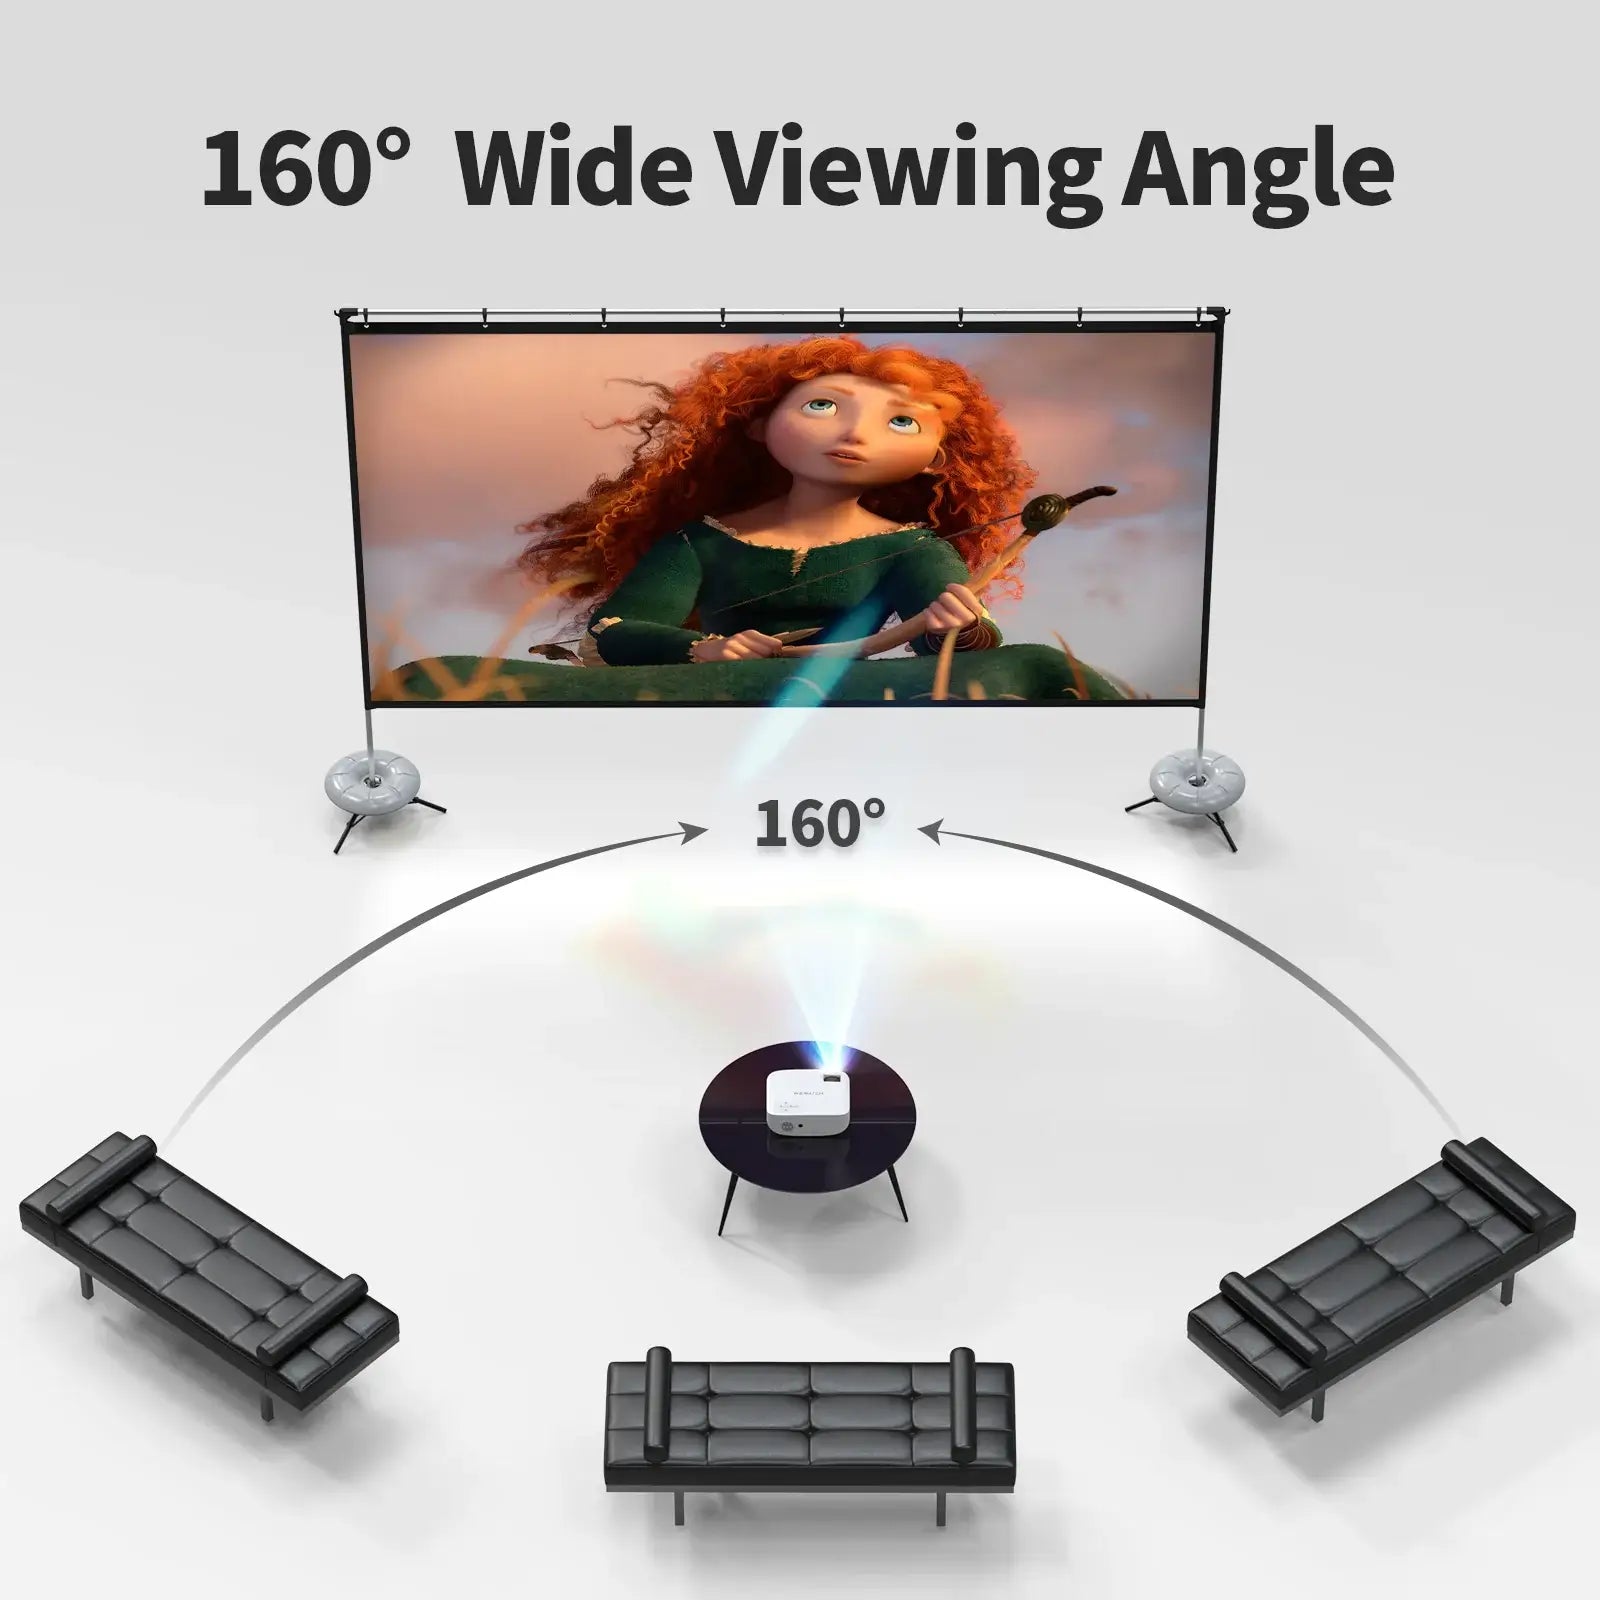 160-wide-viewing-angle